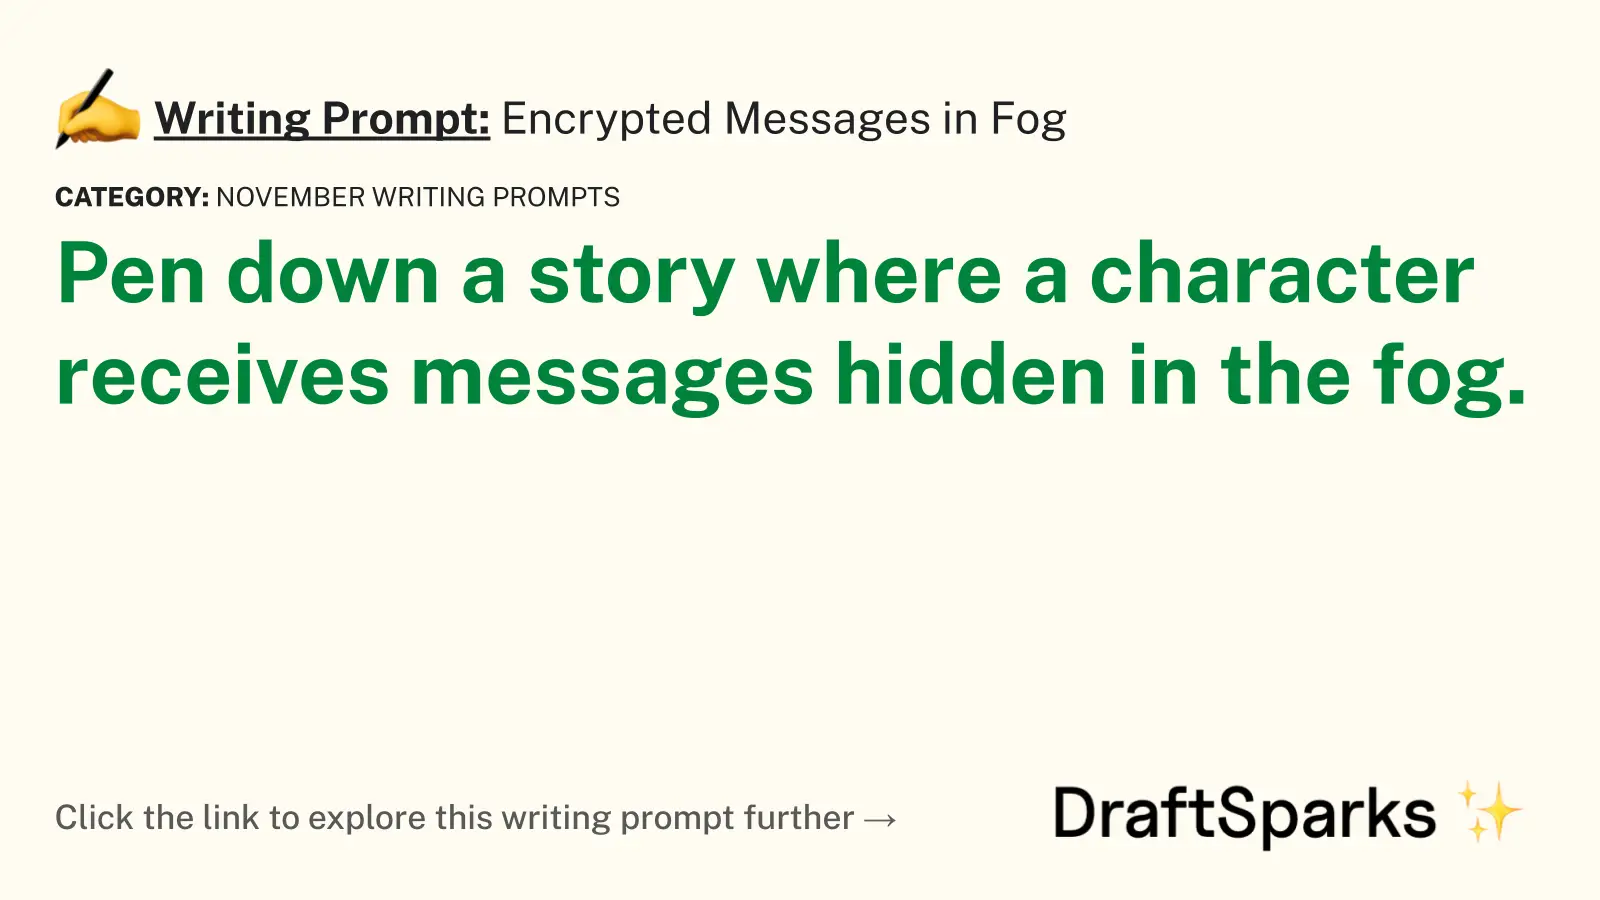 Encrypted Messages in Fog